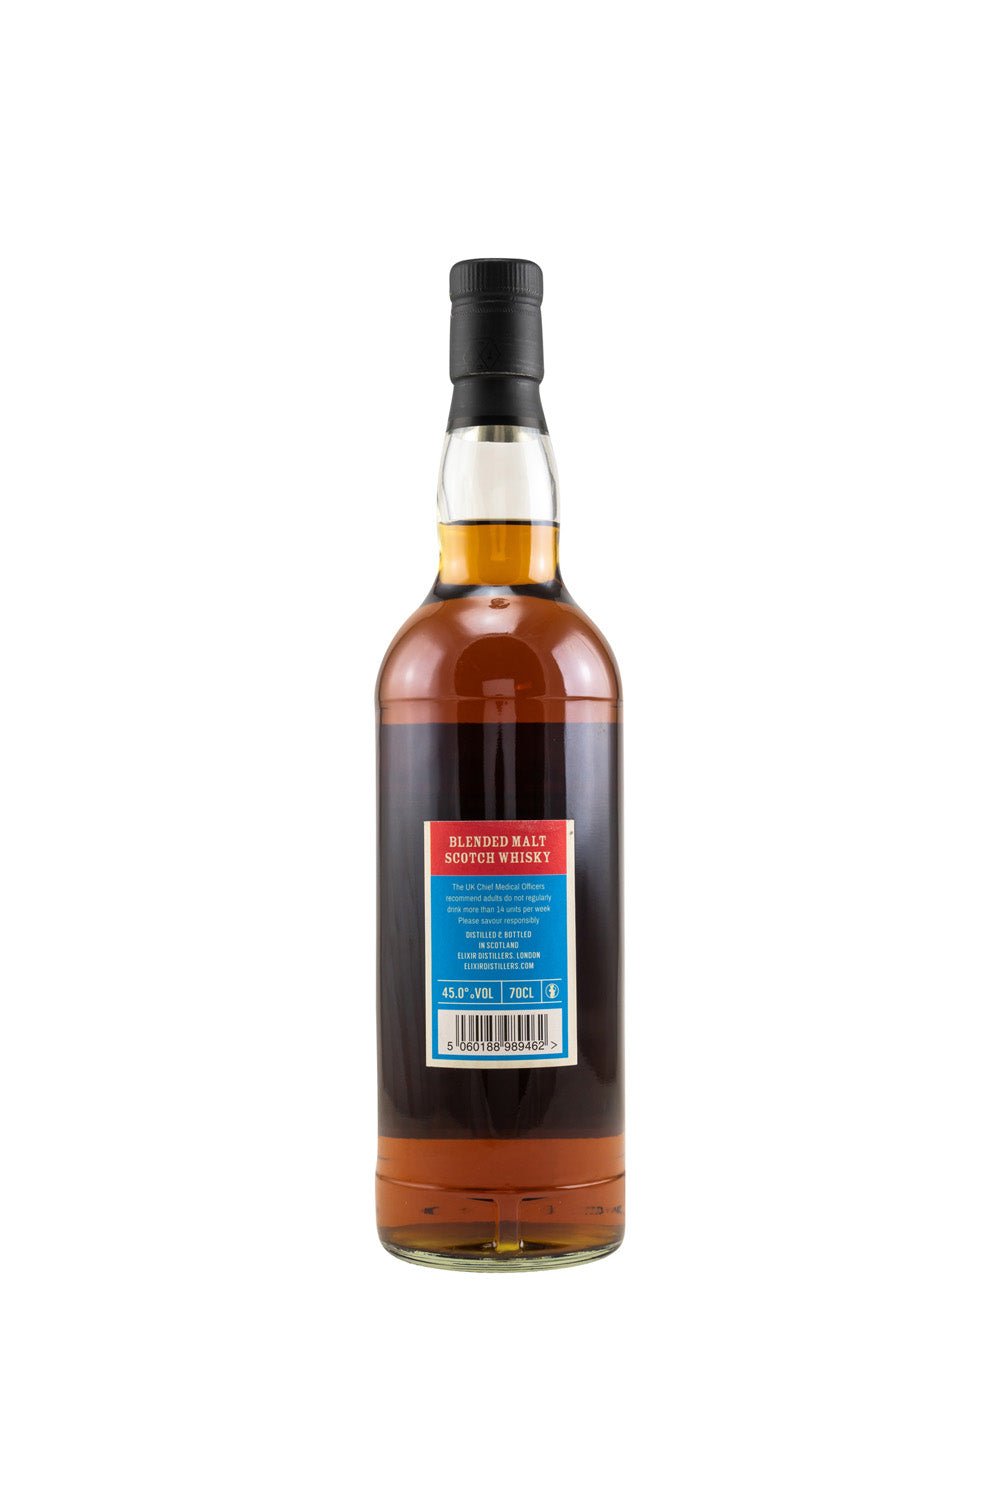 Blended Malt 2001/2020 19 Jahre Sherry Butt #56 (The Whisky Trail Country) 45% vol. 700ml - Maltimore